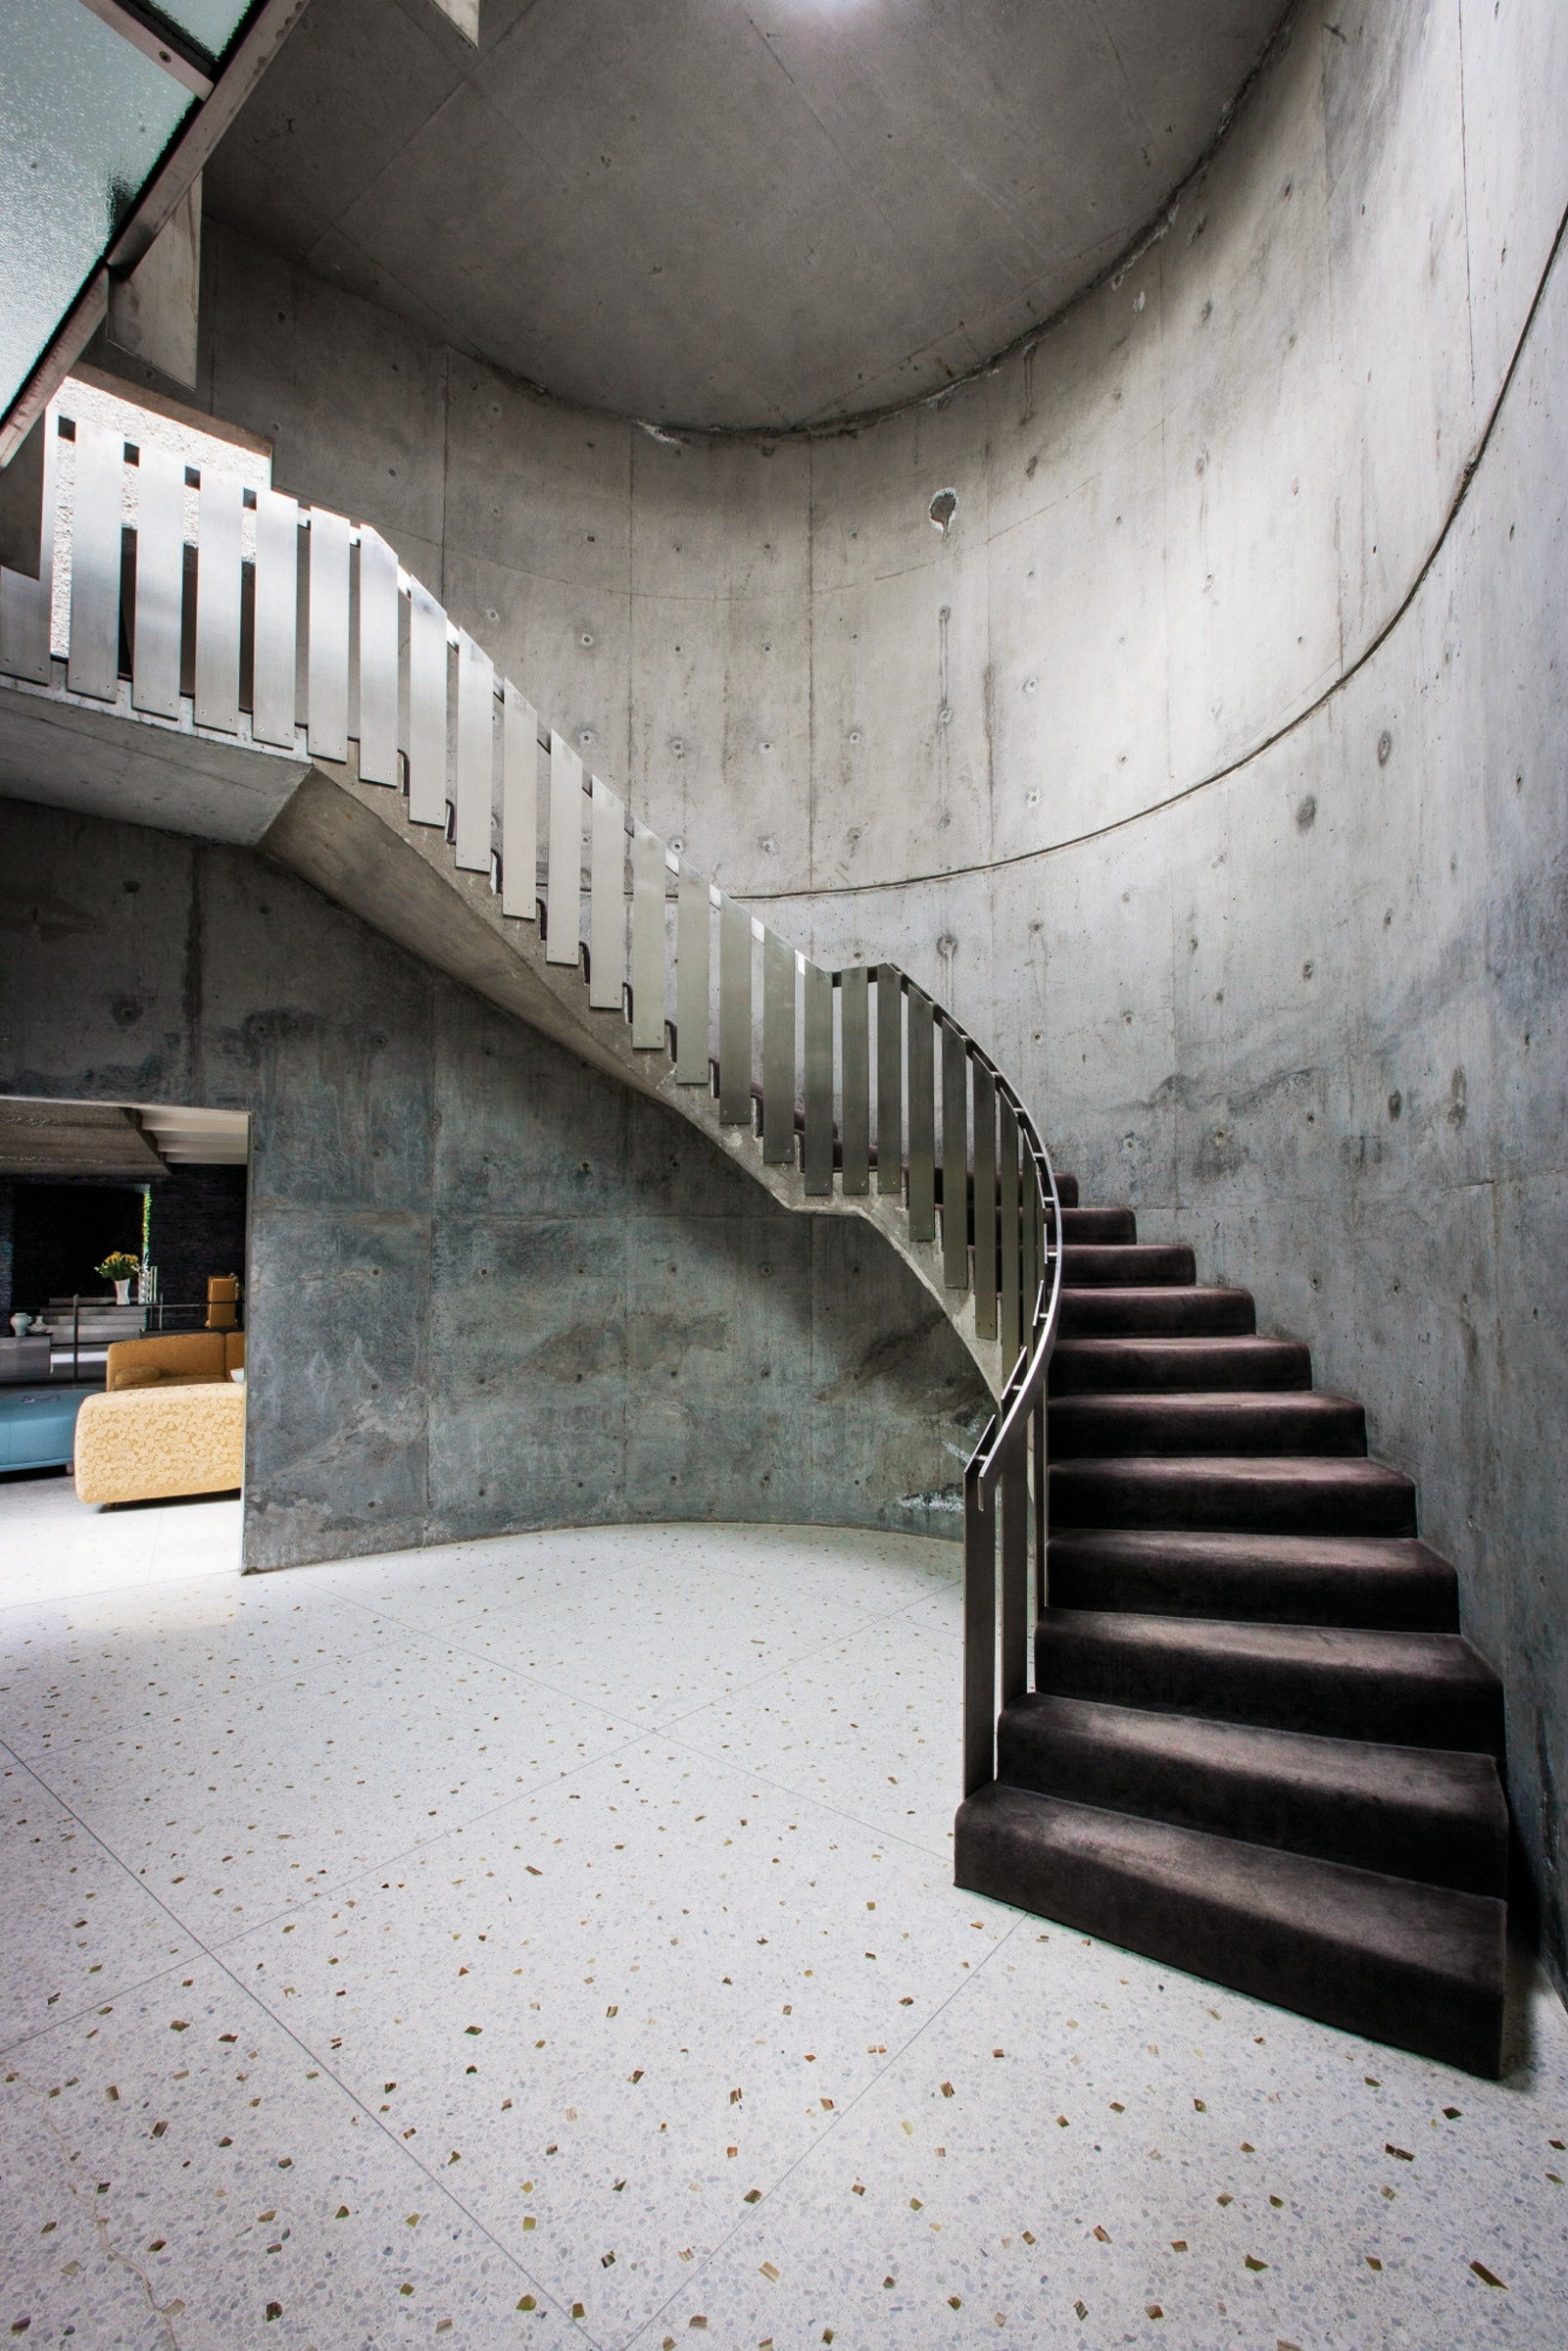 This is a photograph of an atrium with concrete walls and floor and a large sweeping concrete staircase with metal balustrade